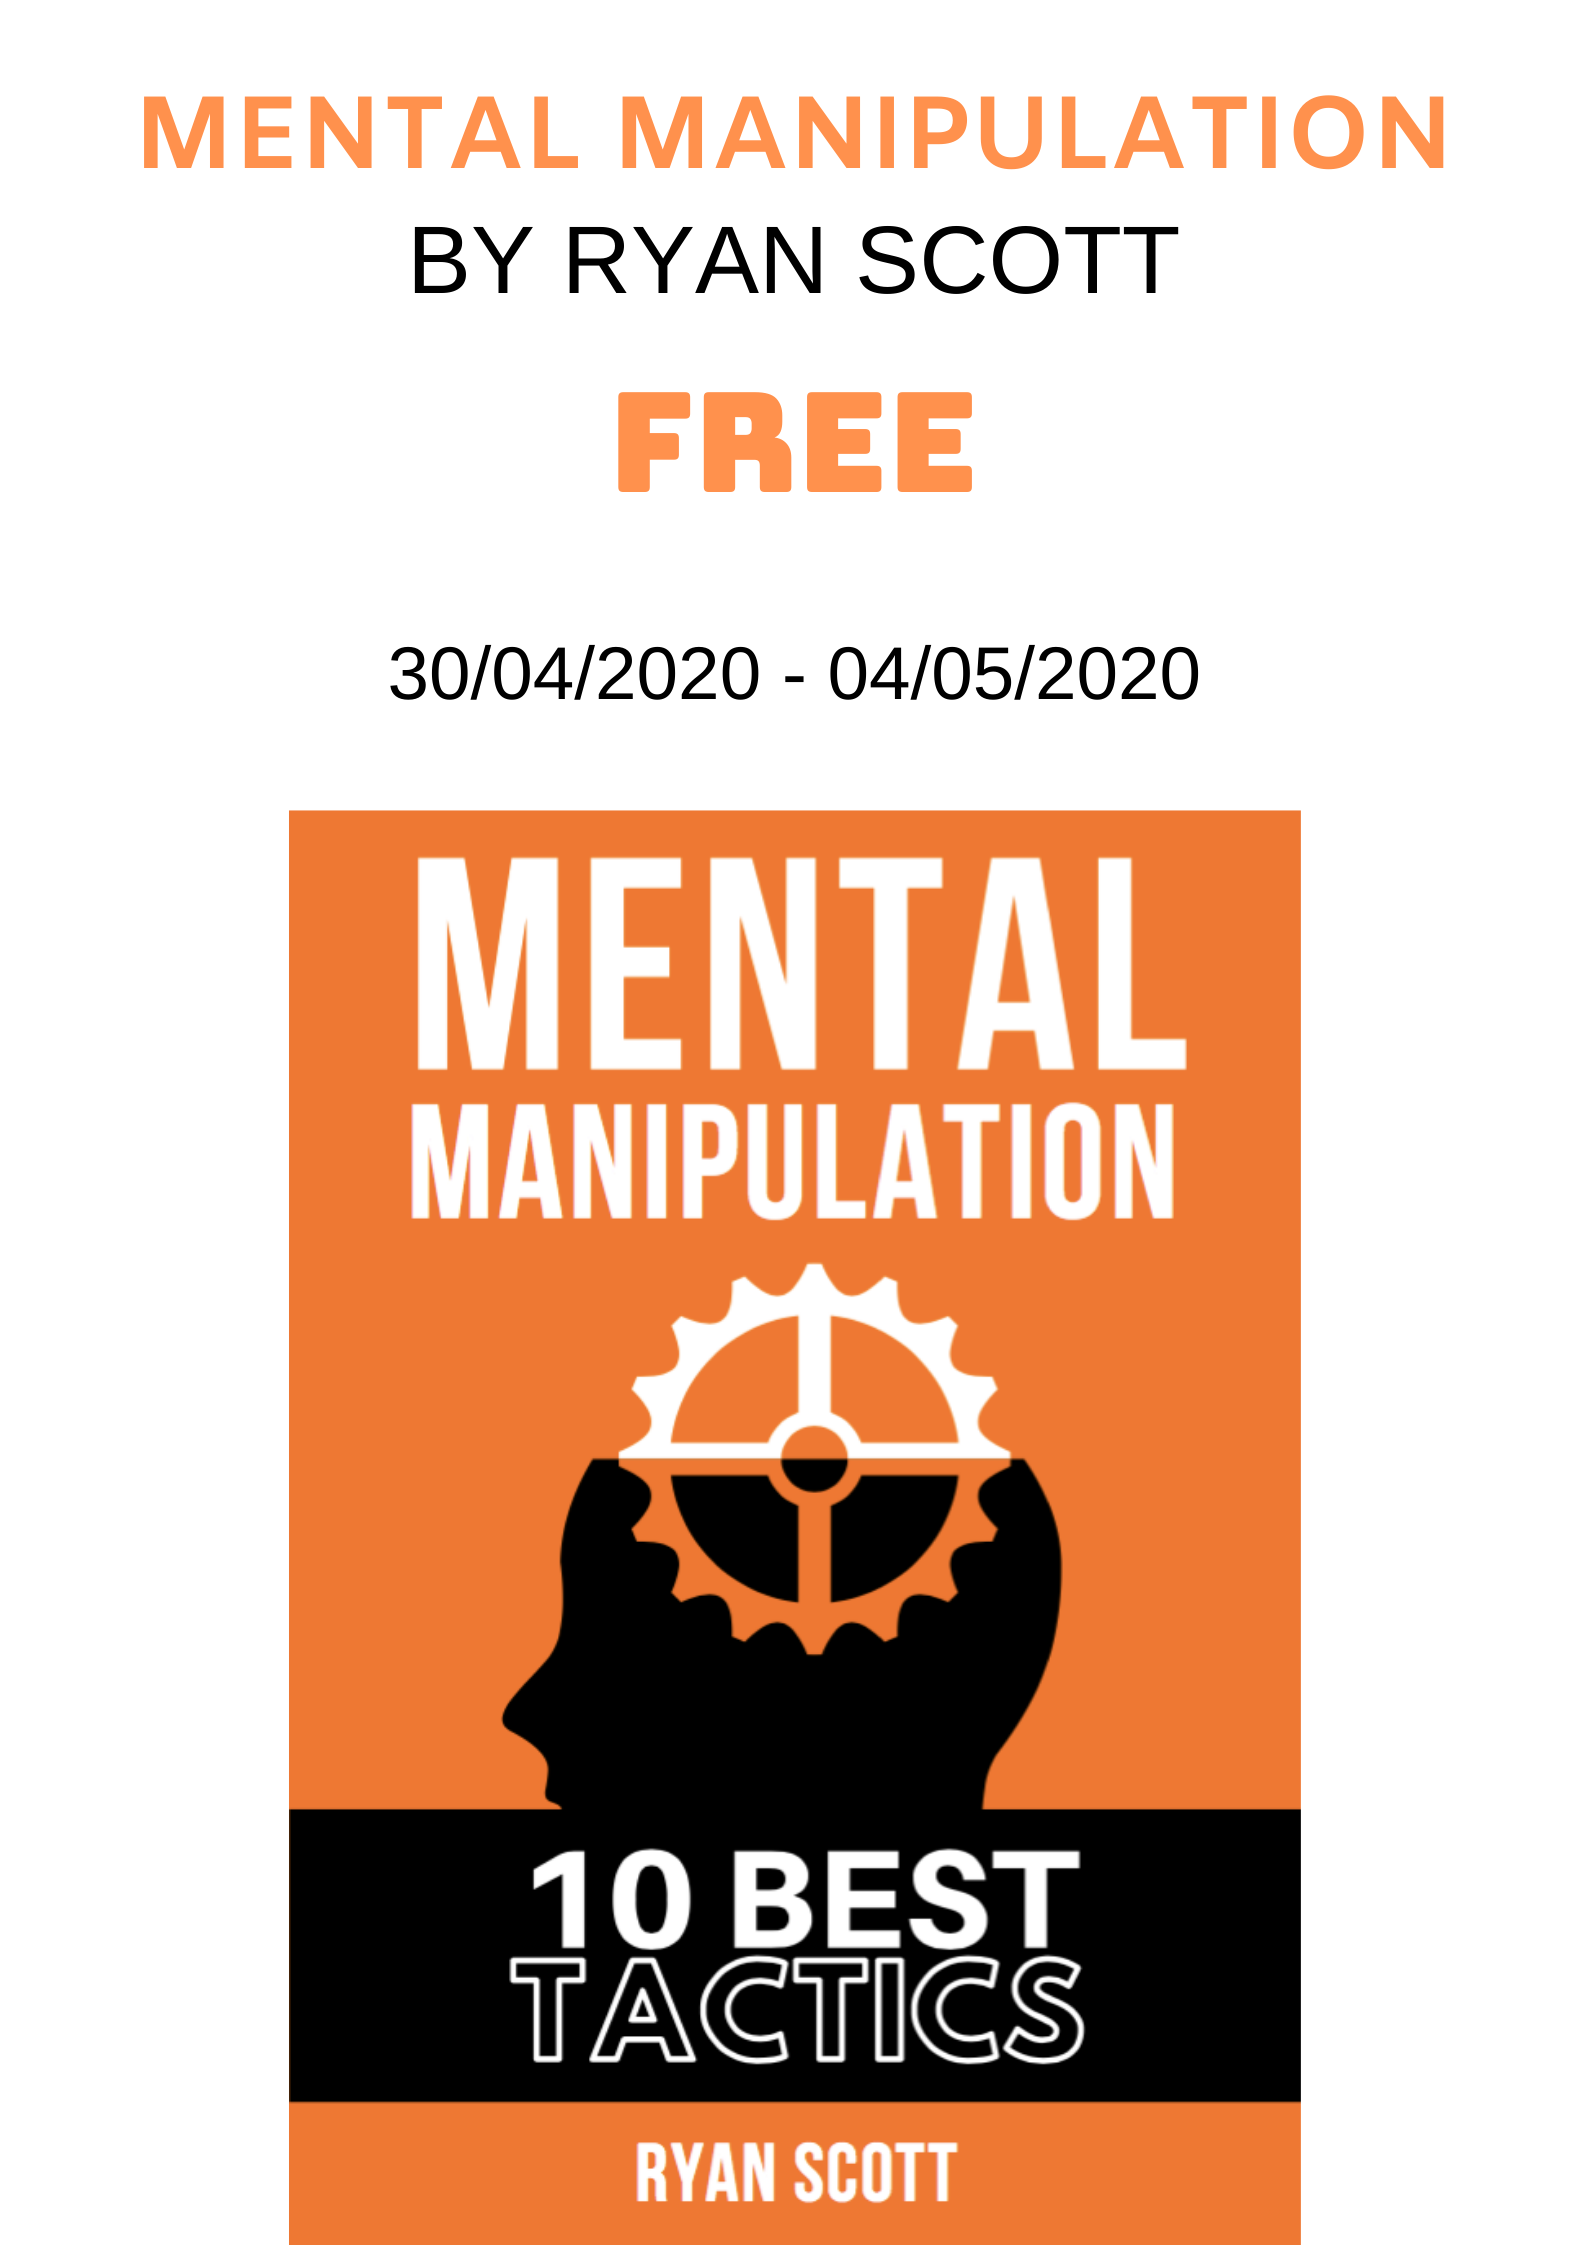 FREE: Mental Manipulation: The Top 10 Manipulation Techniques by Ryan Scott